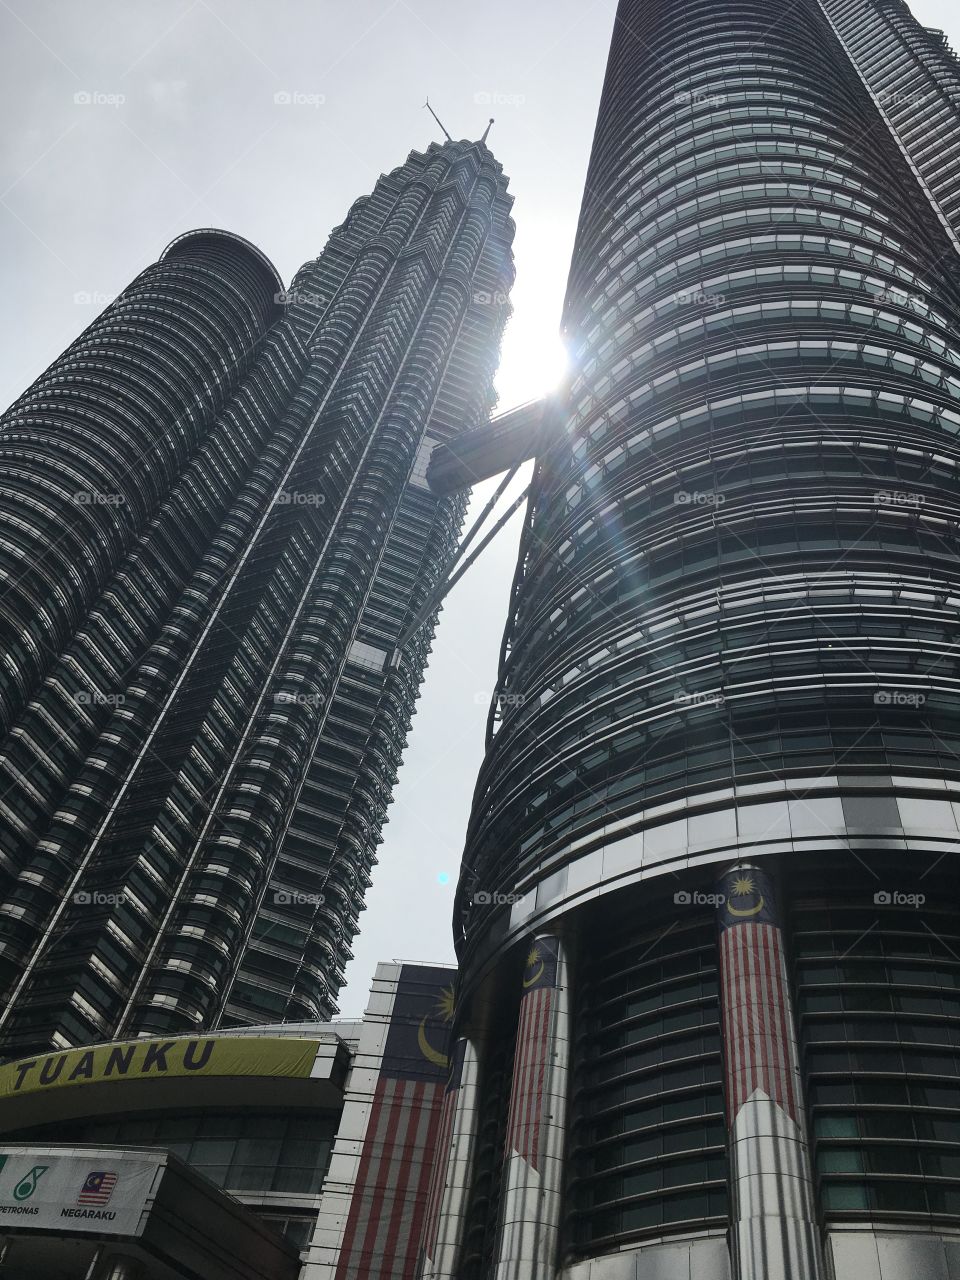 KL’s twin towers 